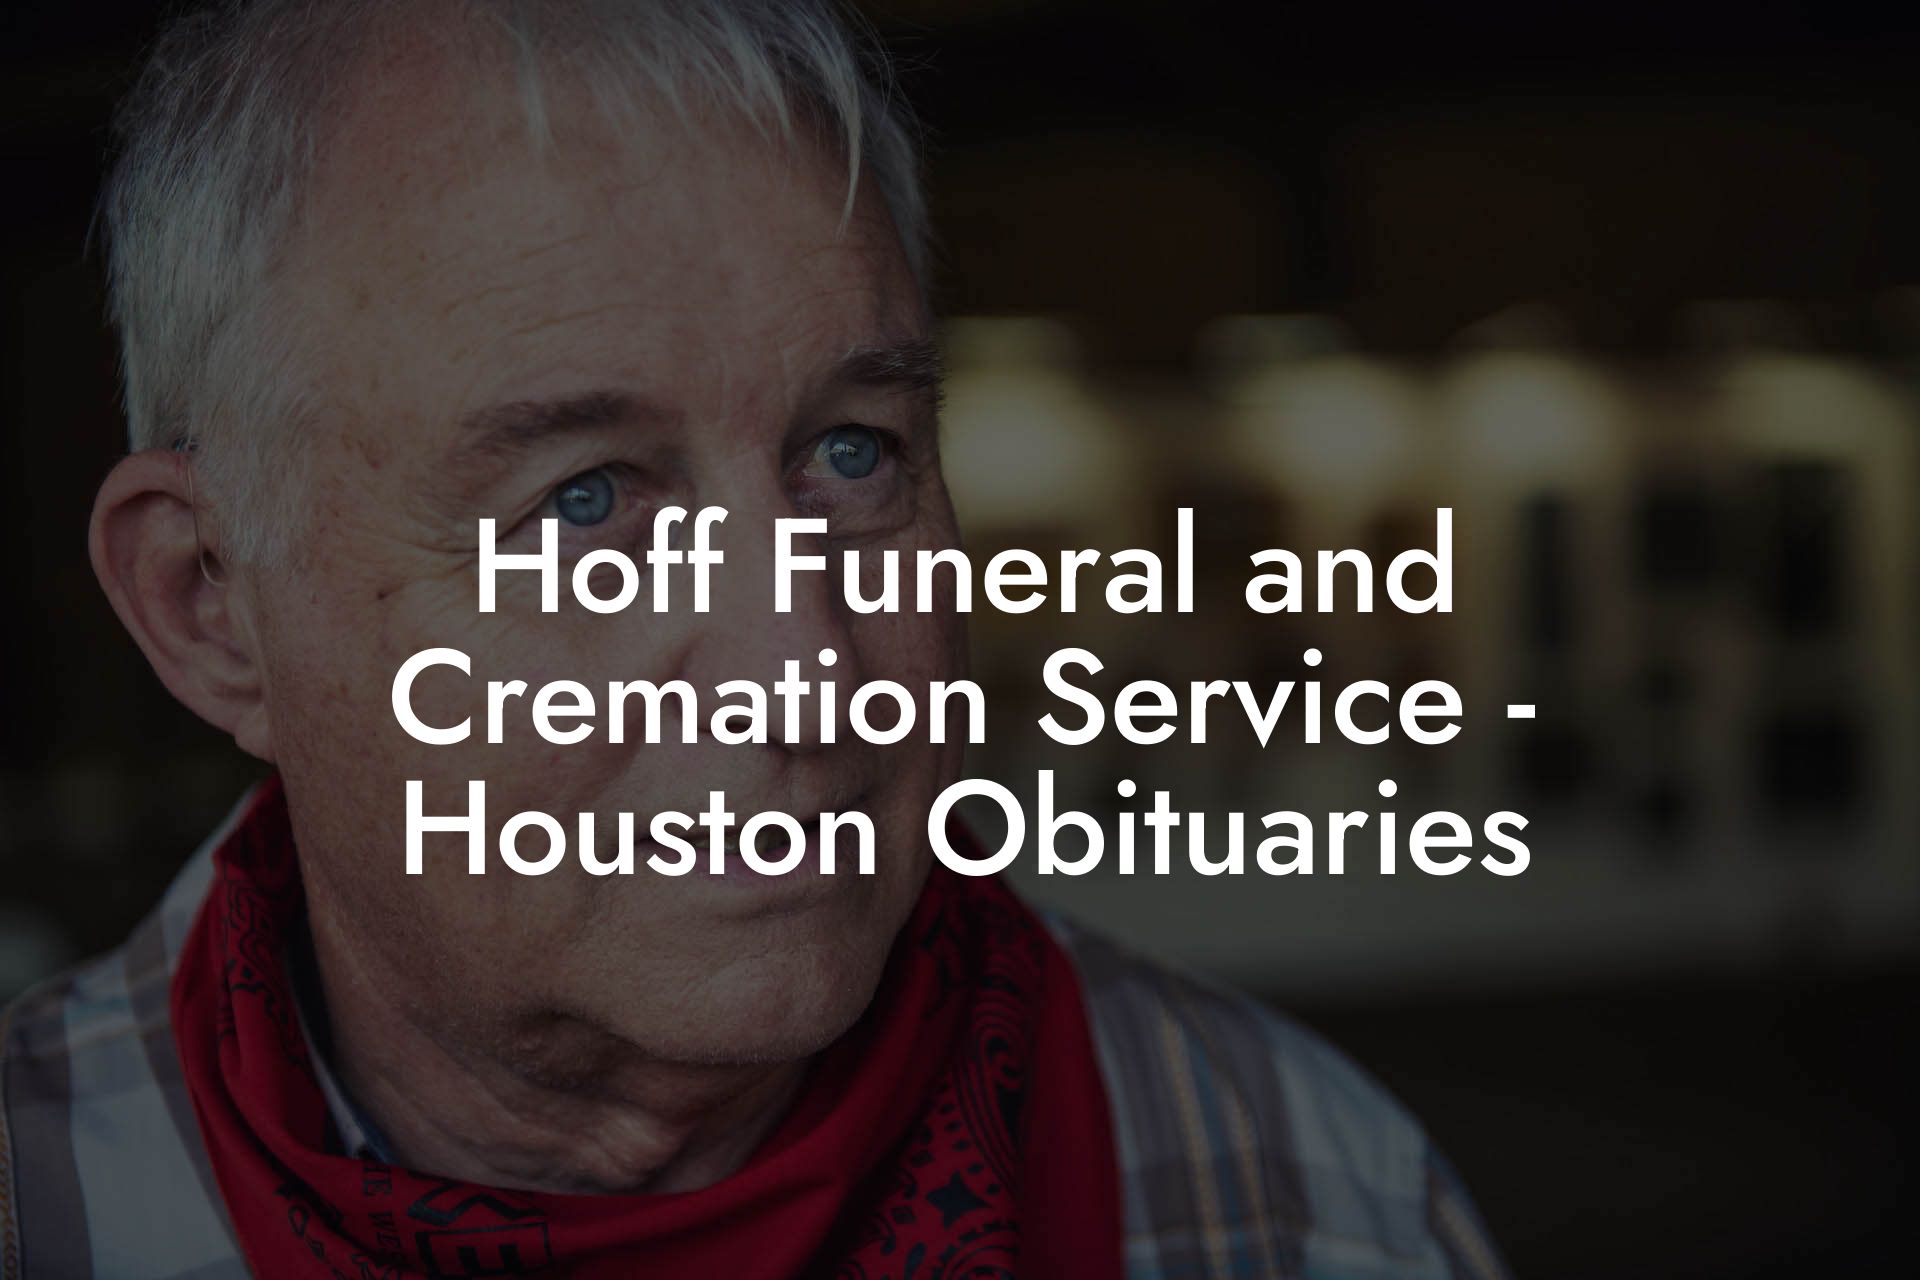 Hoff Funeral and Cremation Service - Houston Obituaries